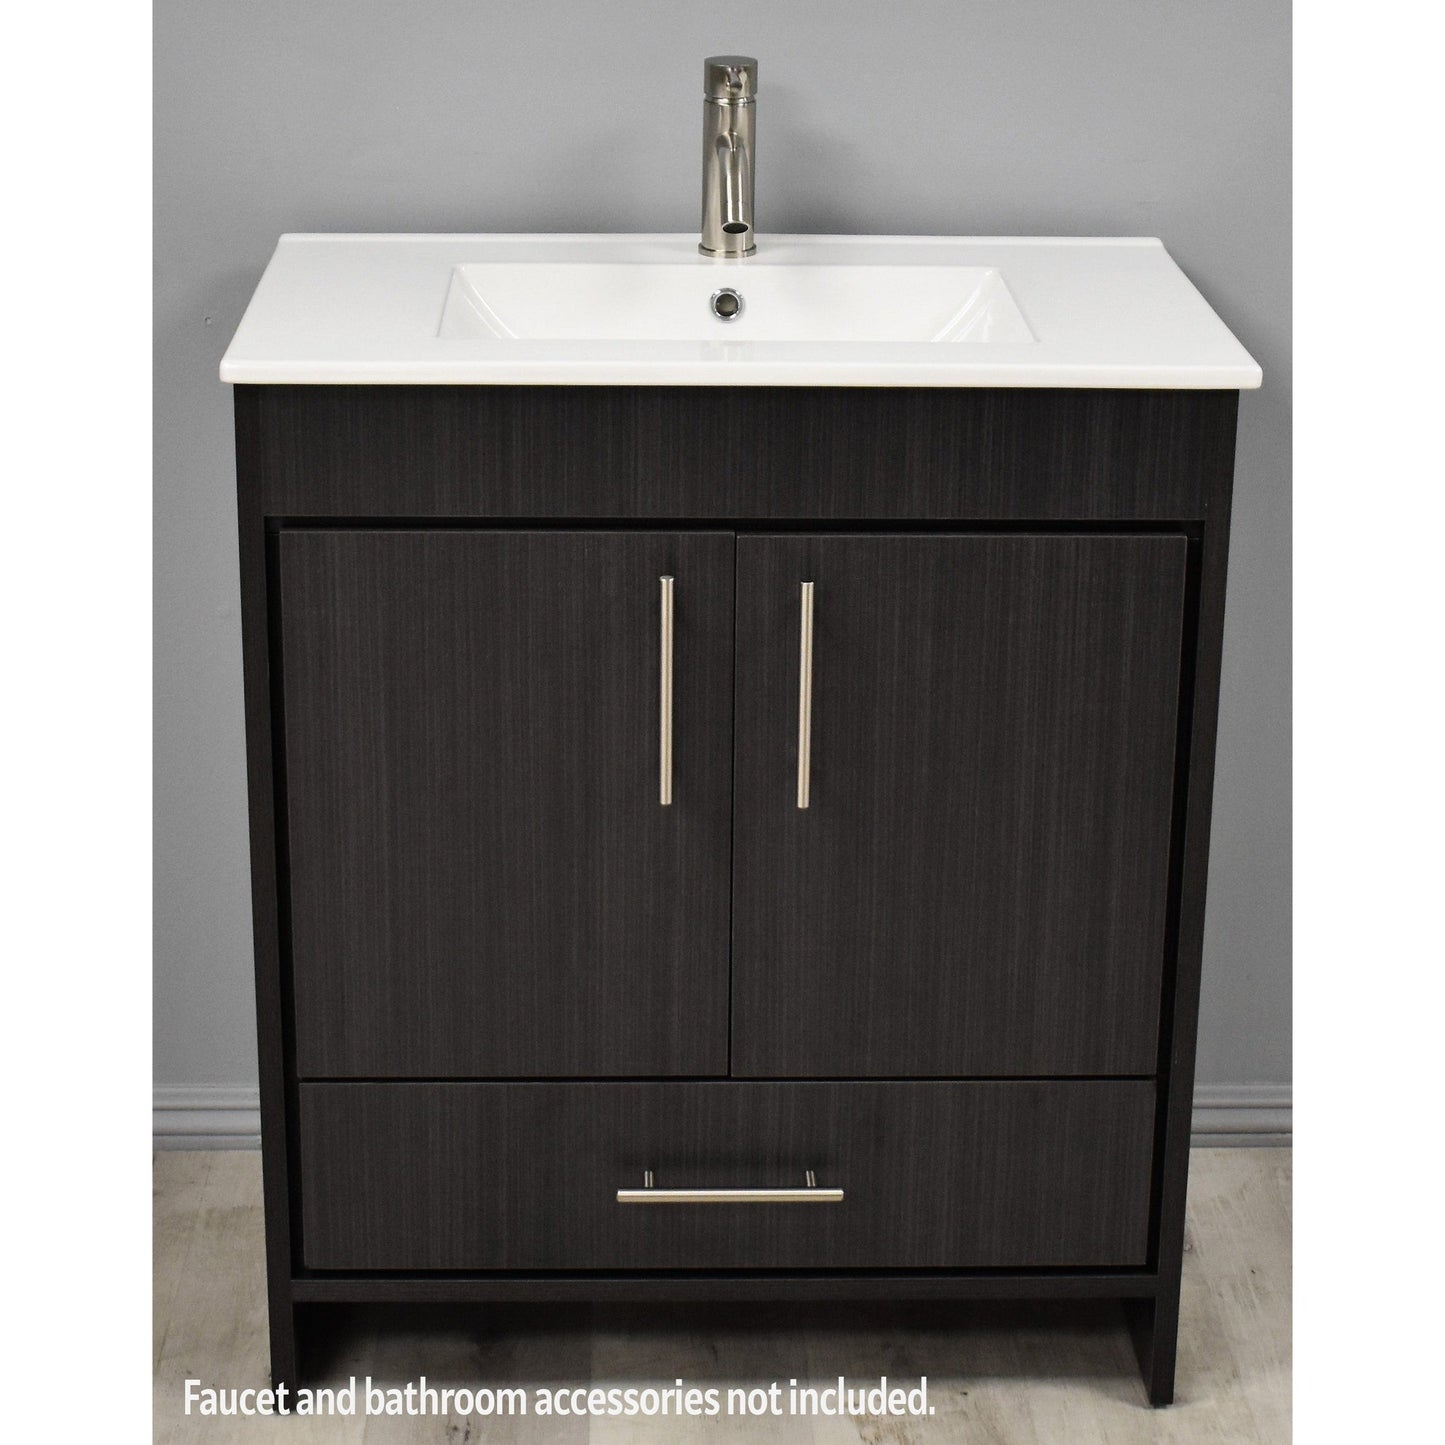 Volpa USA Pacific 30" Black Ash Freestanding Modern Bathroom Vanity With Integrated Ceramic Top and Brushed Nickel Round Handles